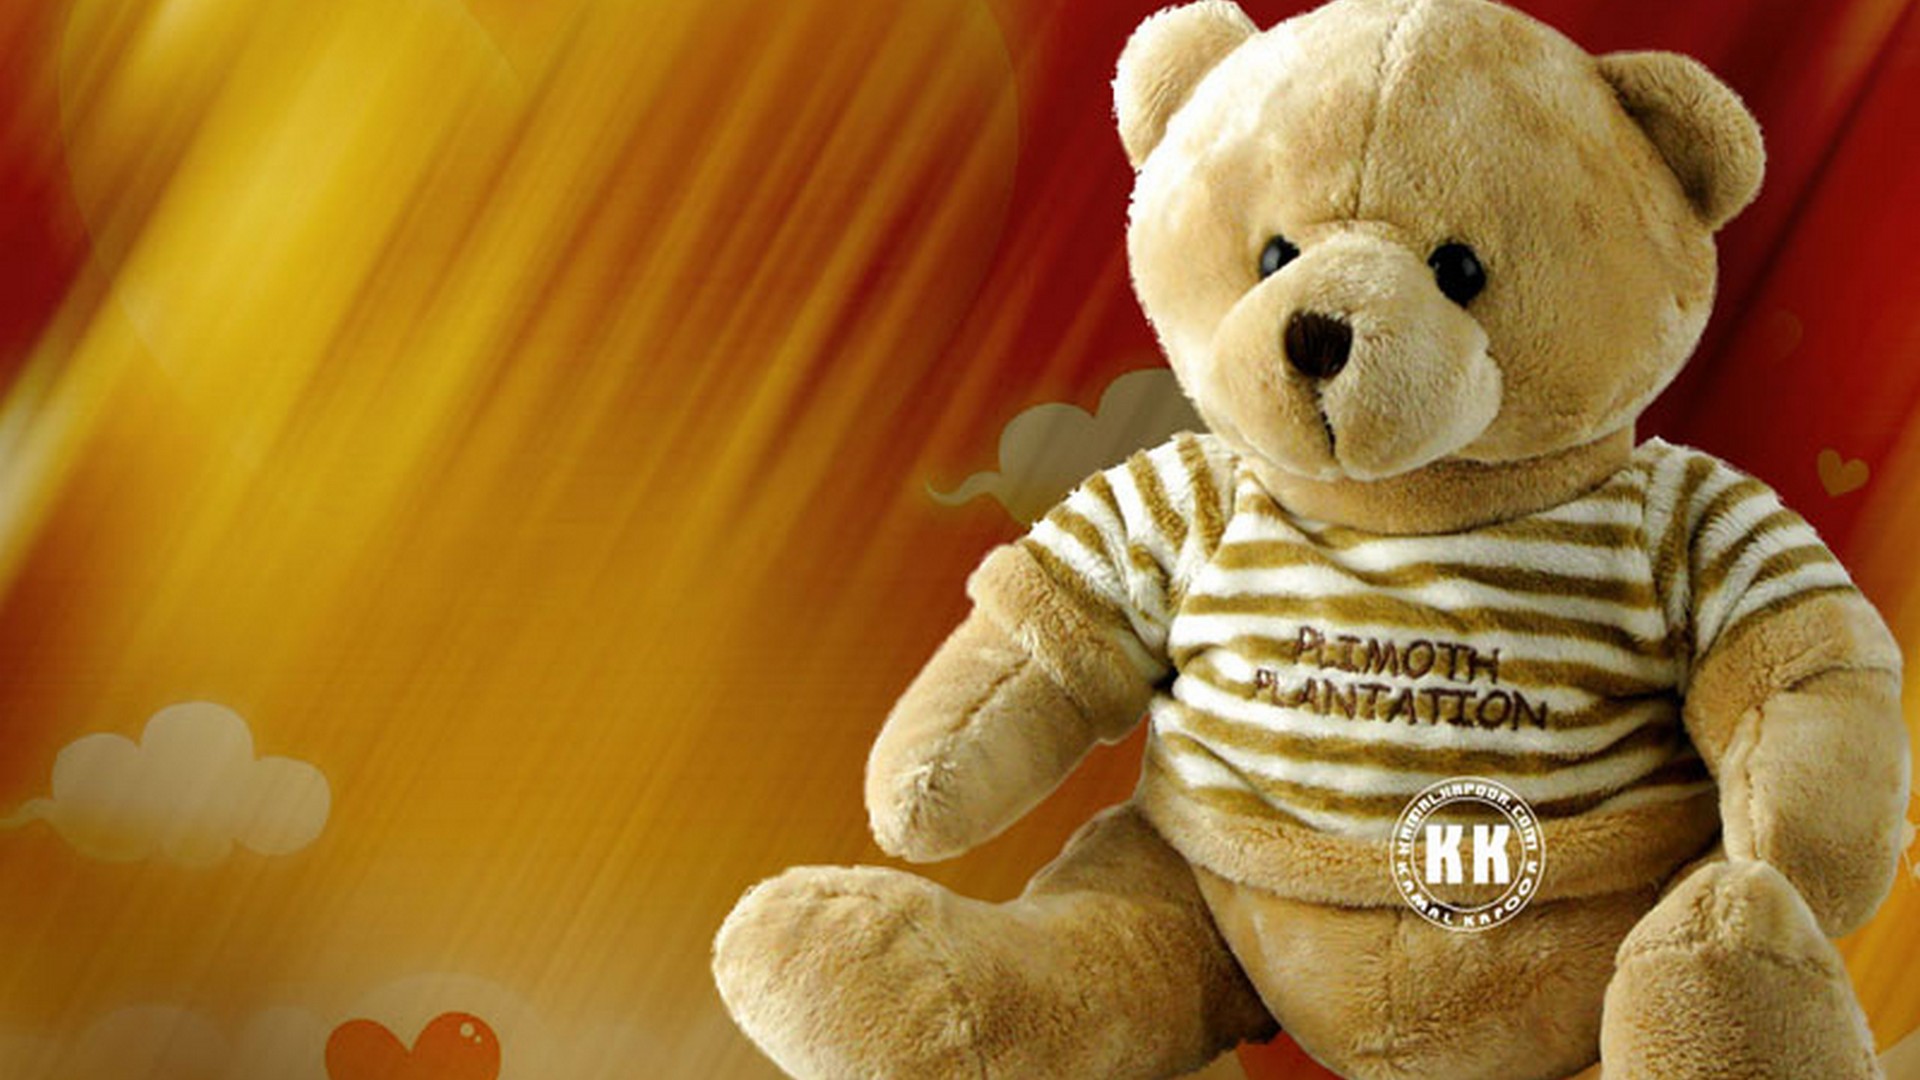 Teddy Bear Giant Desktop Backgrounds HD with resolution 1920X1080 pixel. You can use this wallpaper as background for your desktop Computer Screensavers, Android or iPhone smartphones